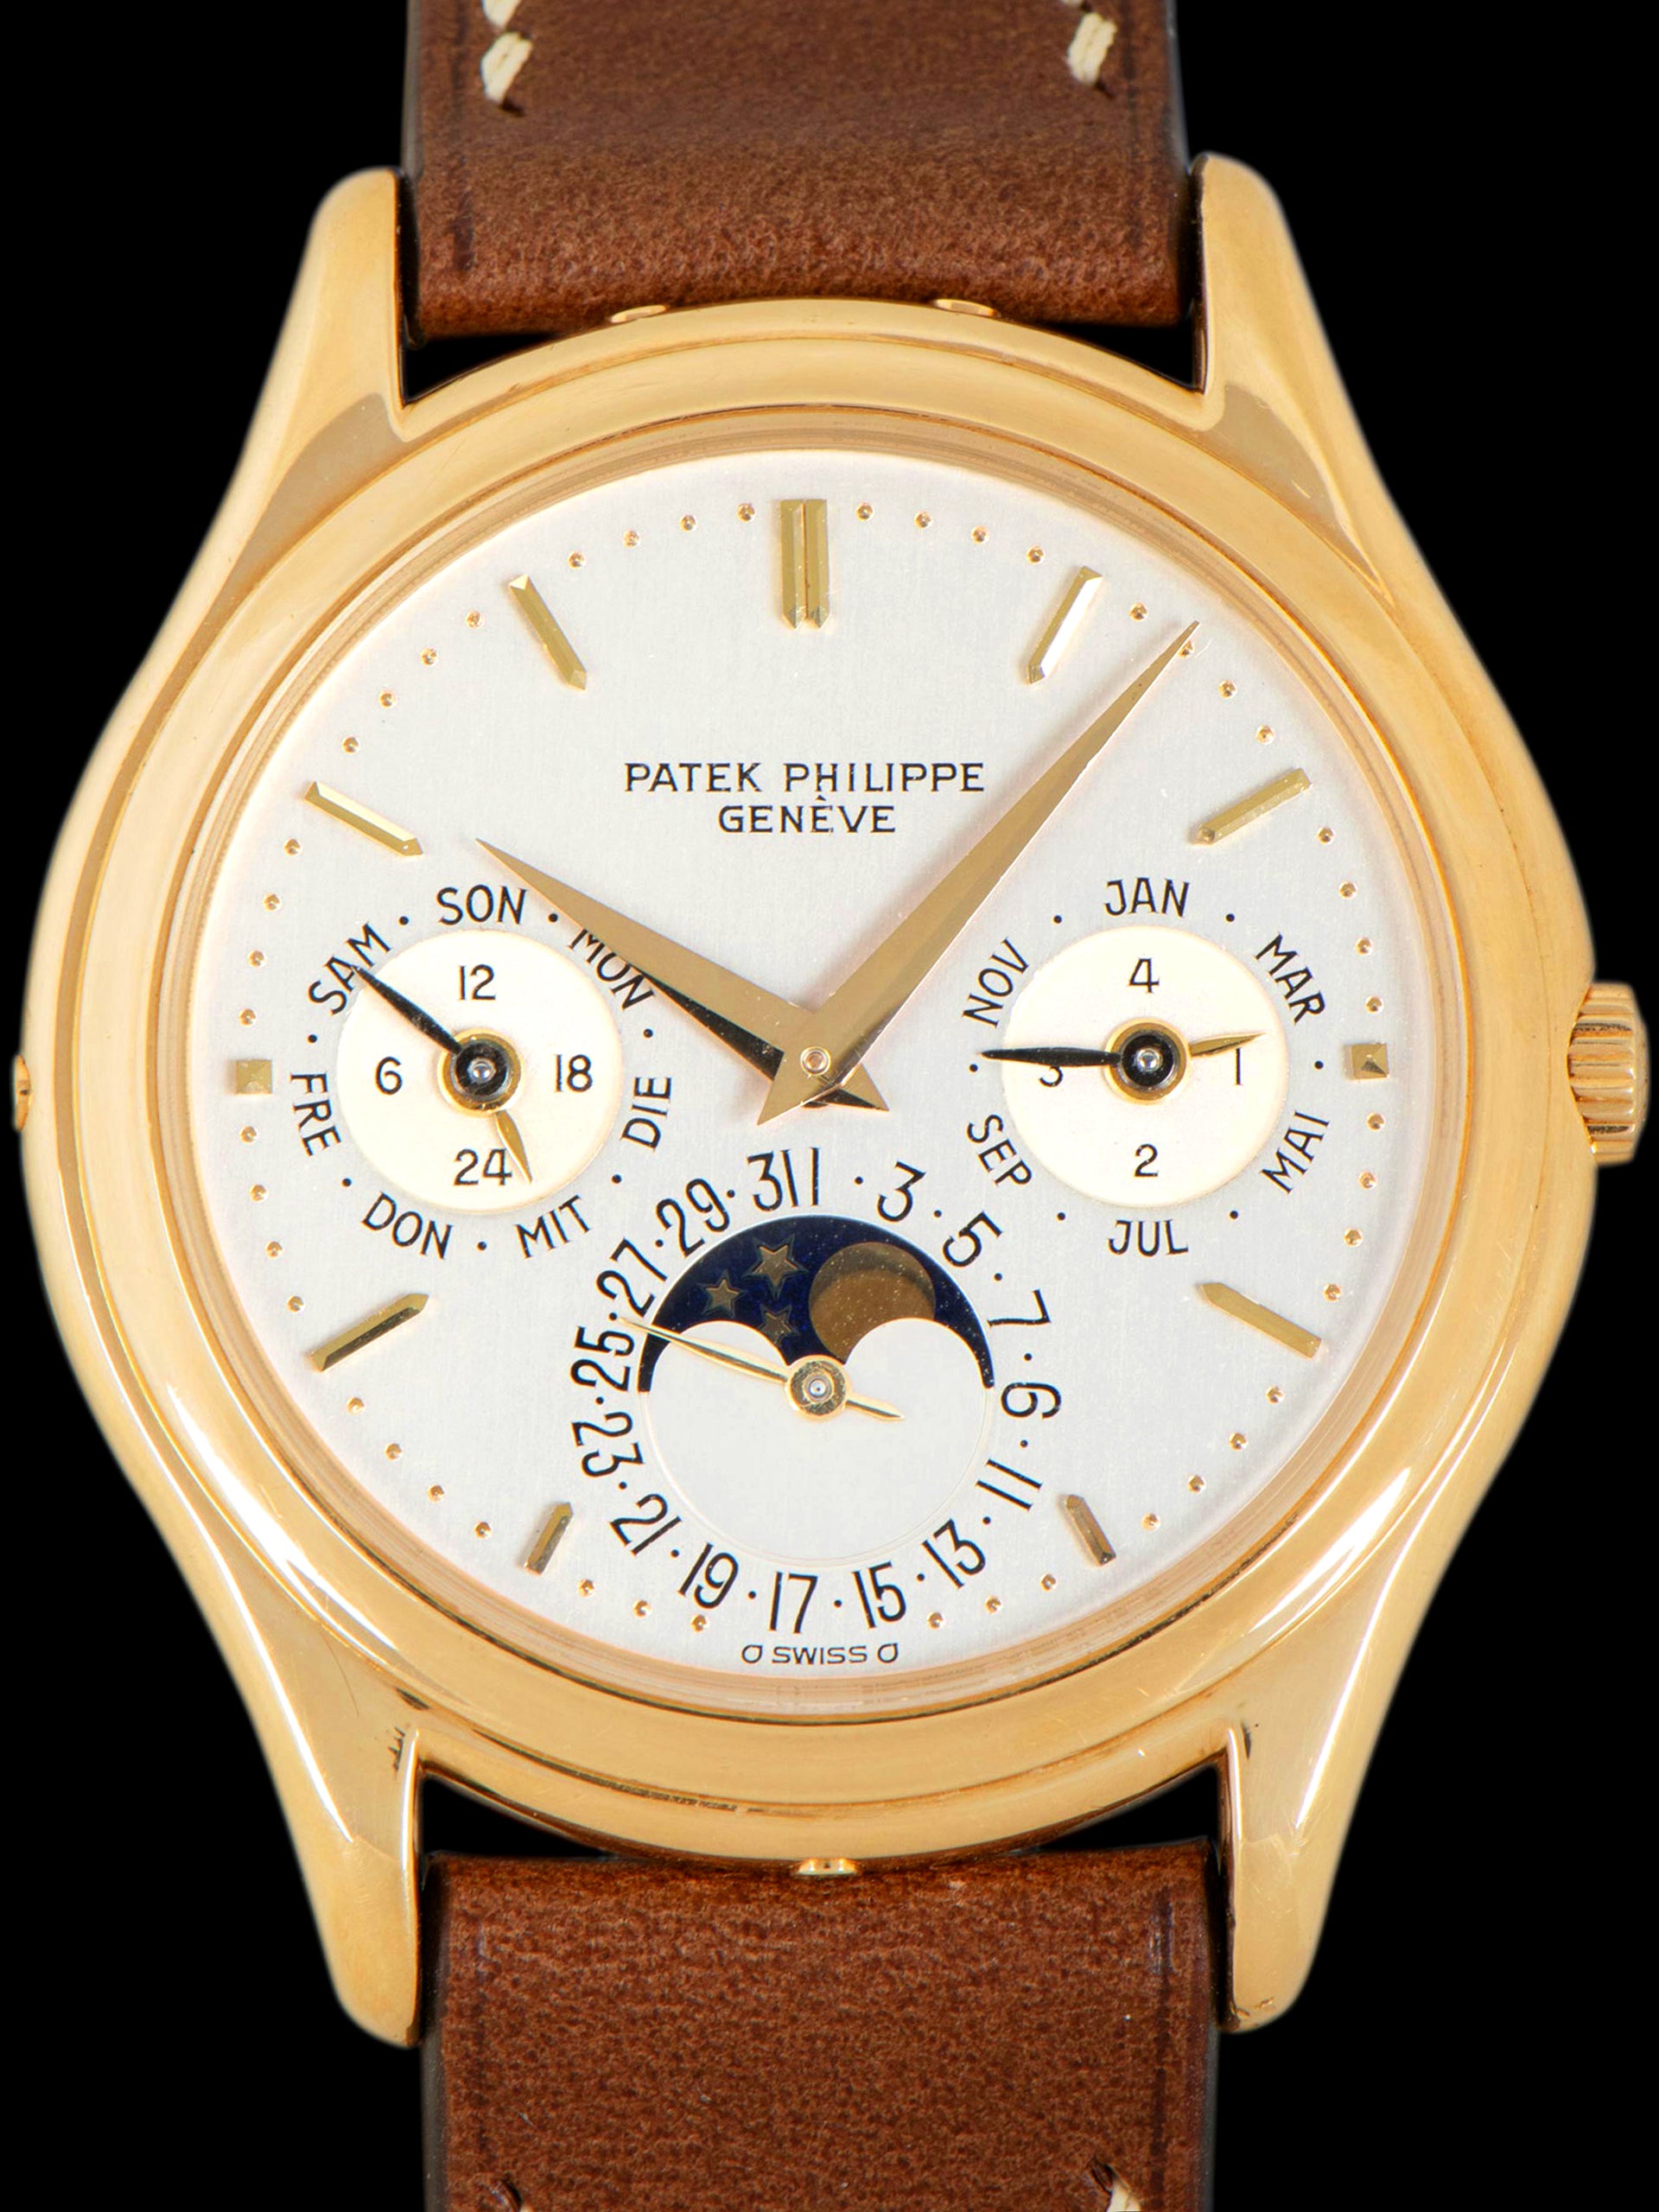 "1st Series" 1987 Patek Philippe Perpetual Calendar Moonphase (Ref. 3940J) 18K YG W/ Extract From The Archive